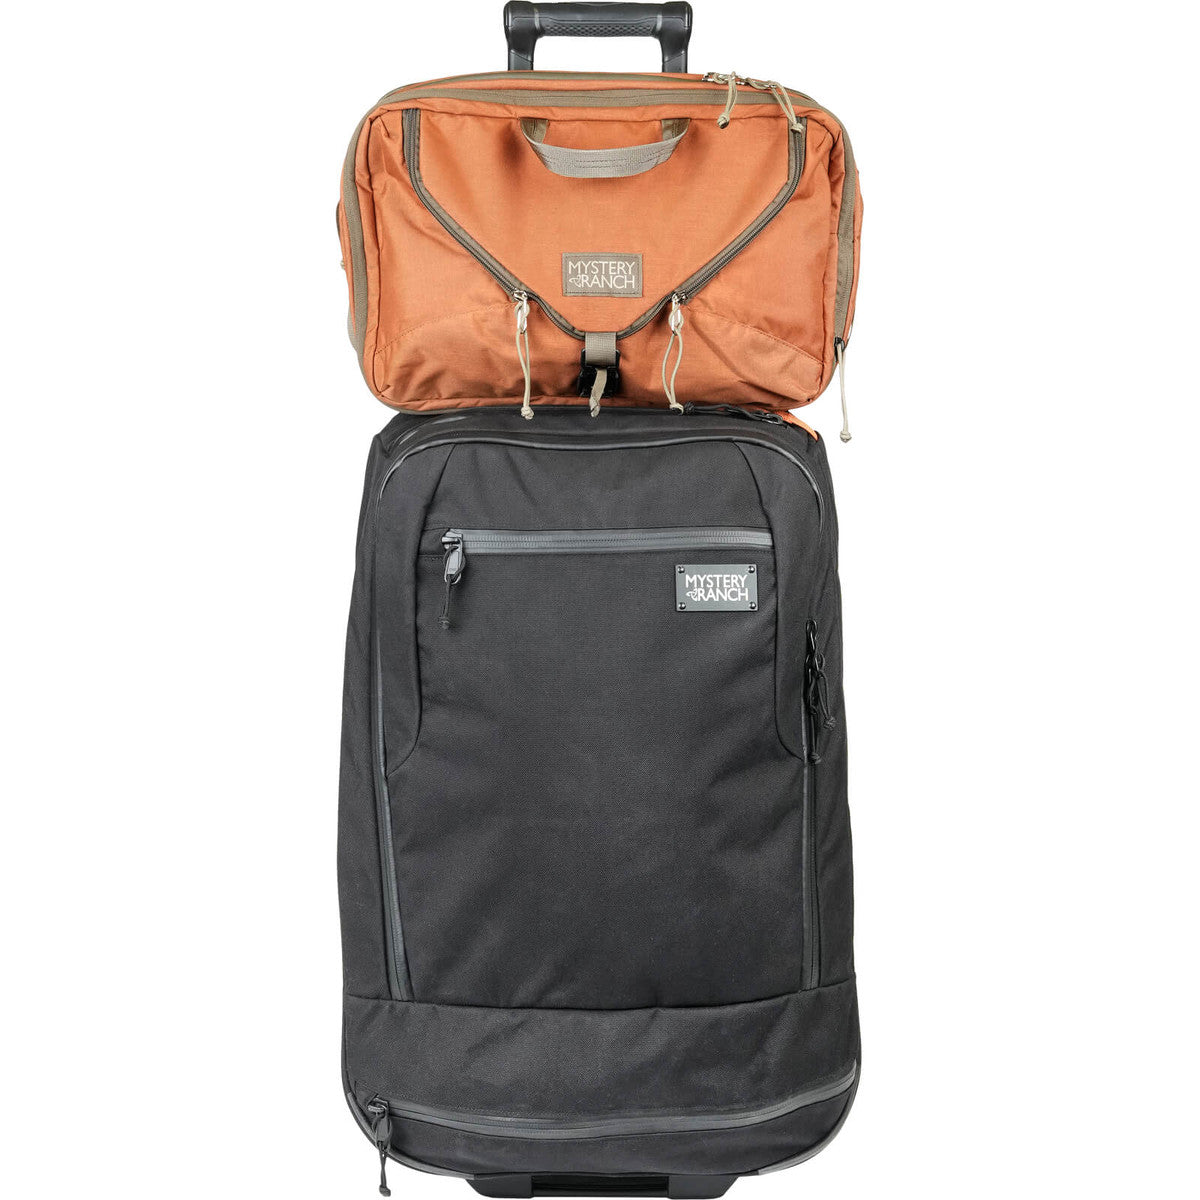 Mystery ranch | 3 Way 18 Expandable Briefcase | Backpack